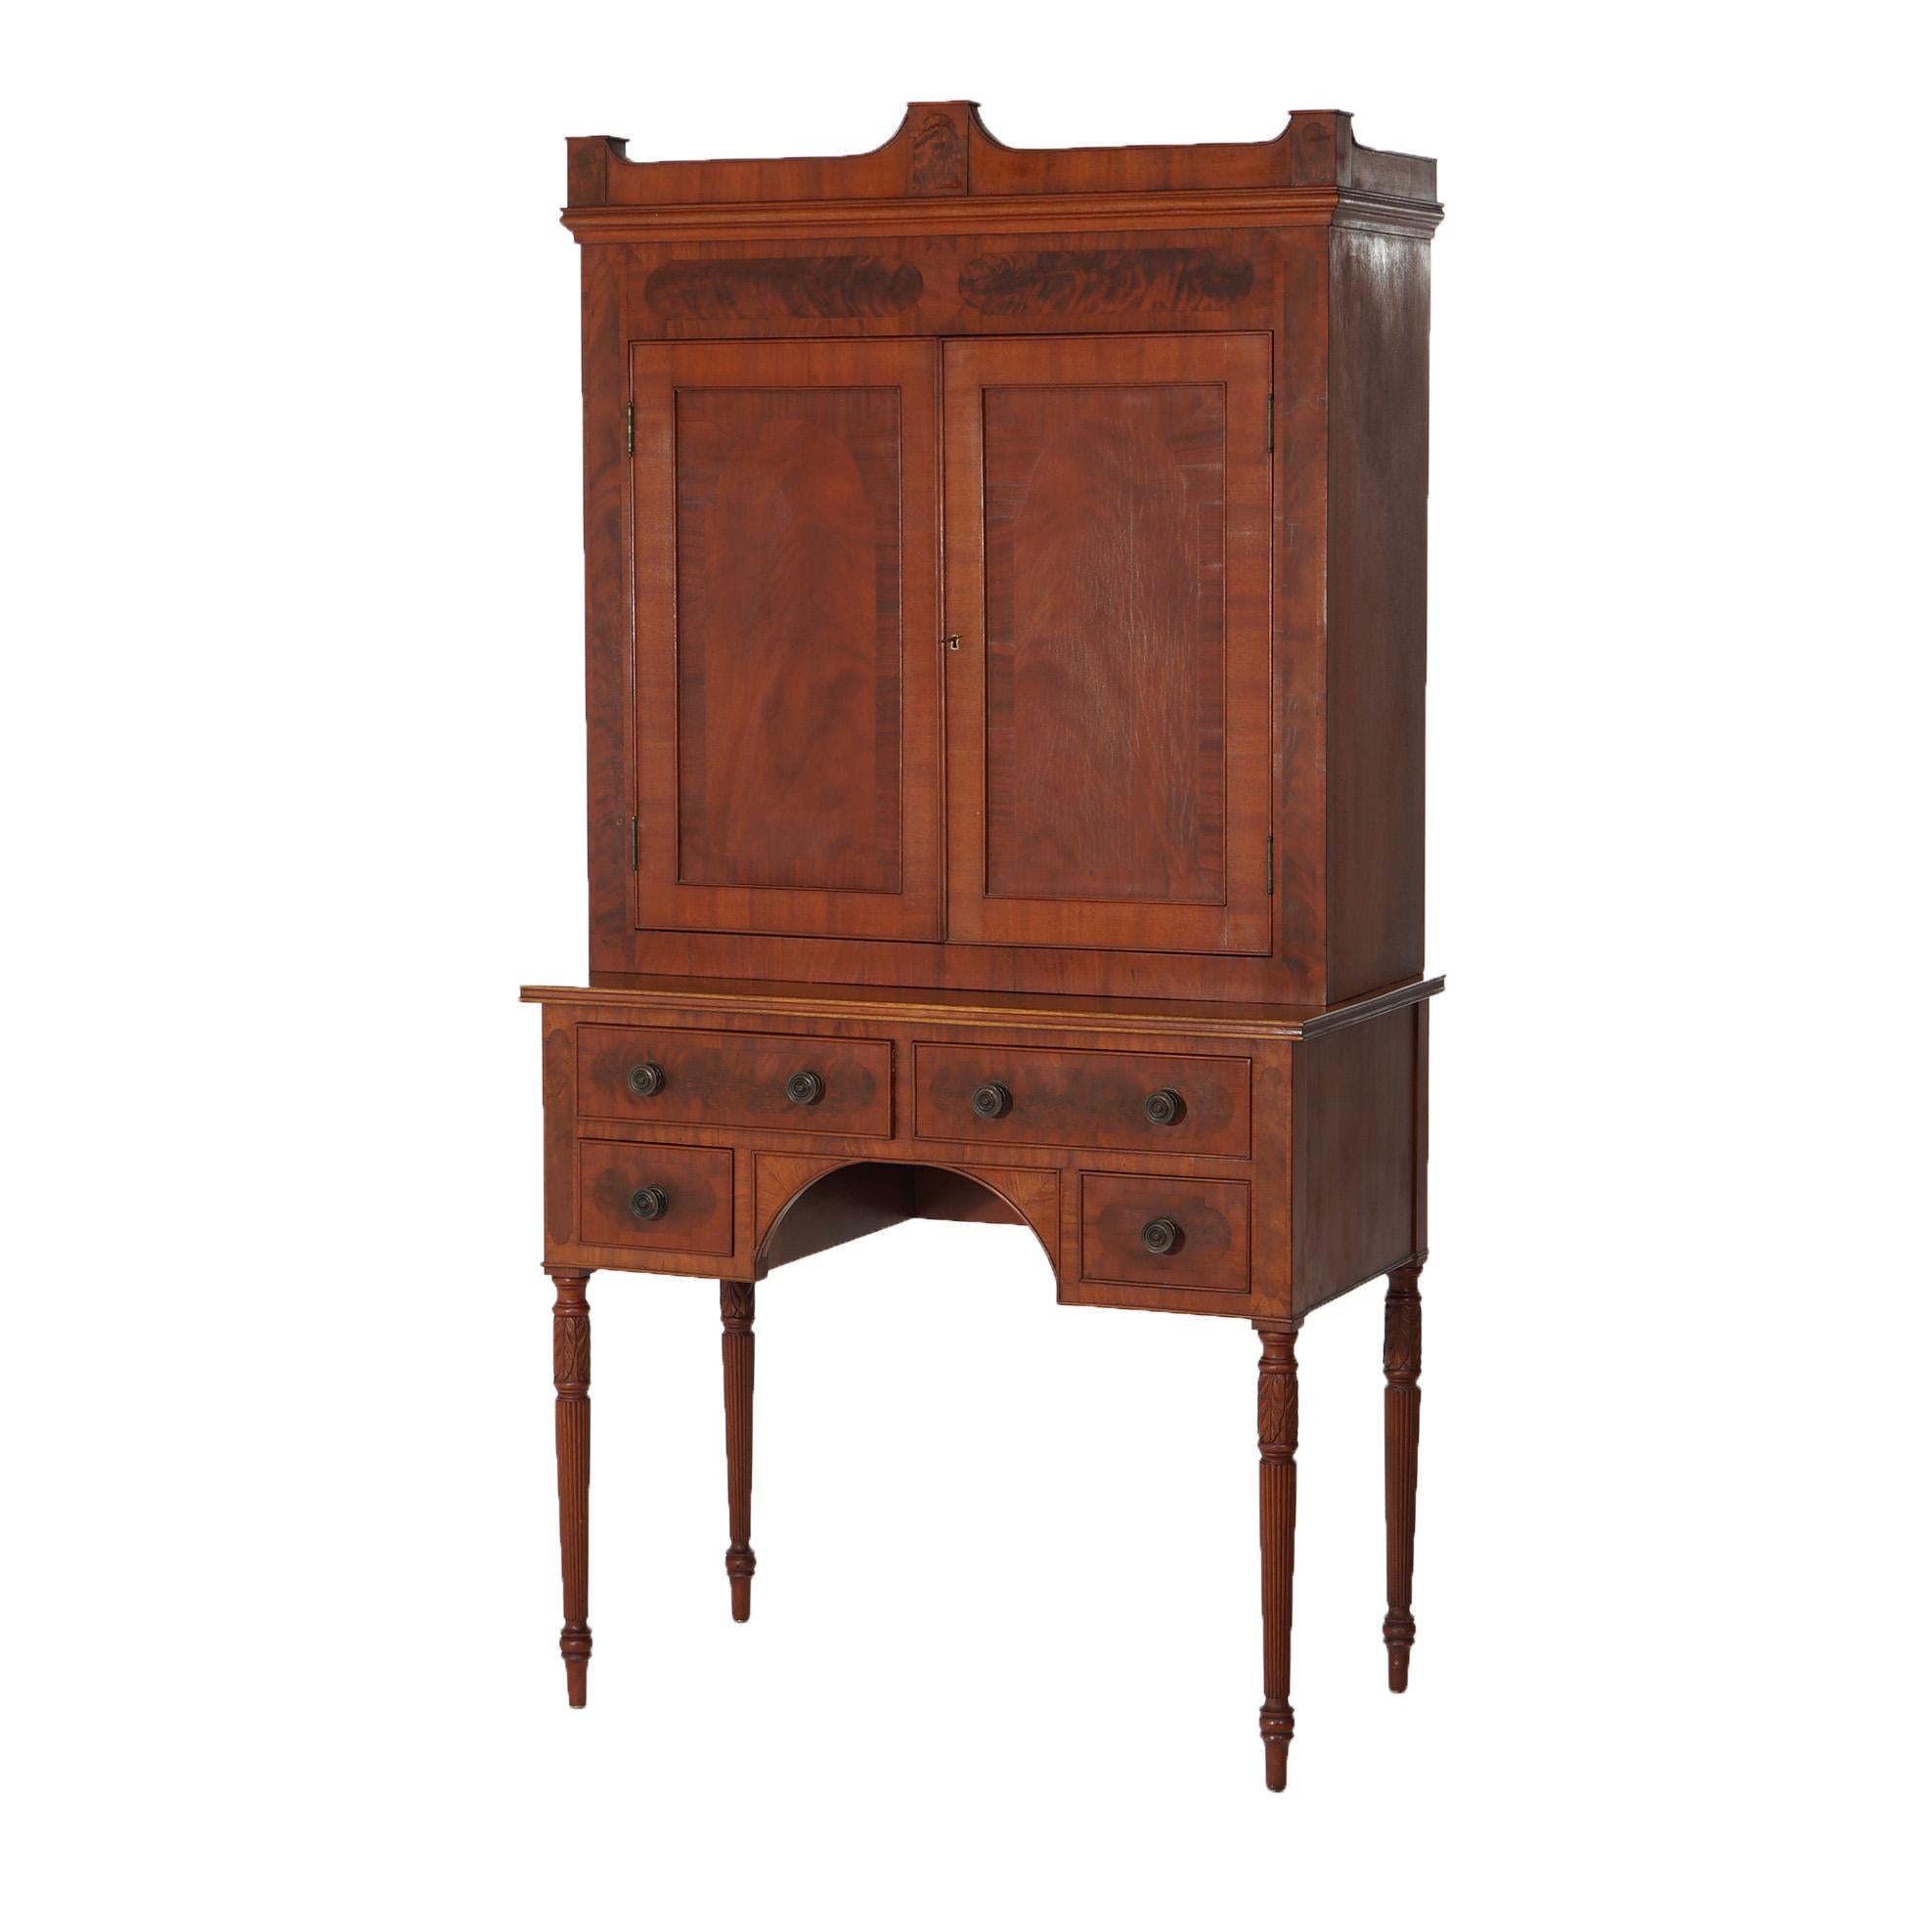 ***Inquire About Lower In-House Shipping Rates - Reliable Service & Fully Insured***
An antique Sheridan secretary offers flame mahogany construction with upper having a shaped crest over case with double doors opening to shelved interior; lower